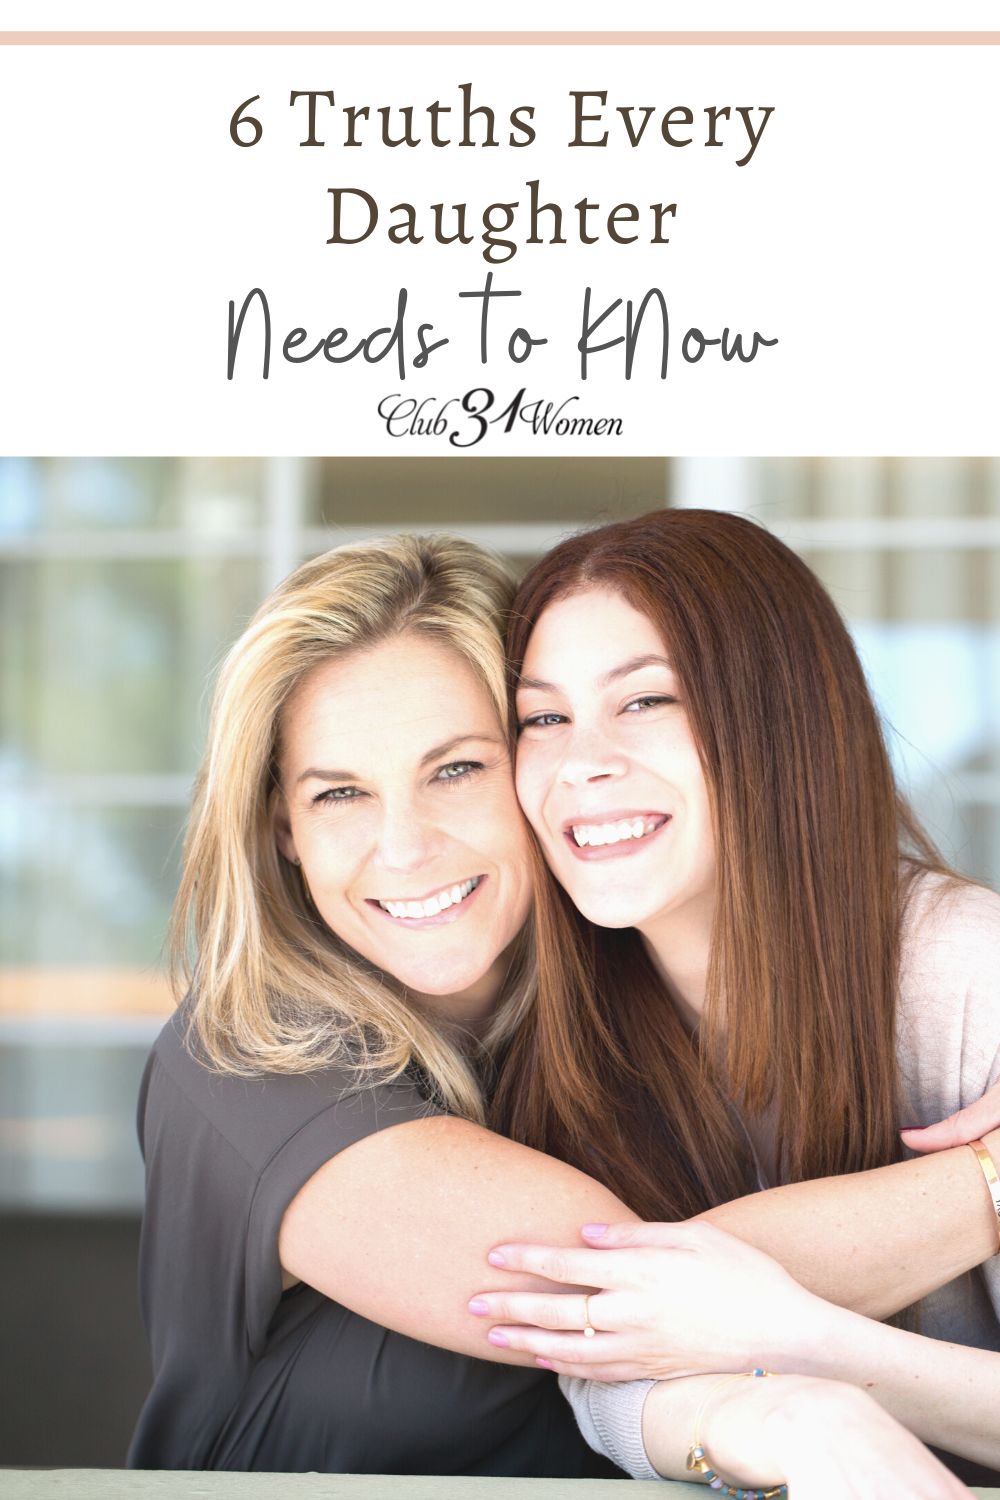 6 Truths Every Daughter Needs to Know via @Club31Women